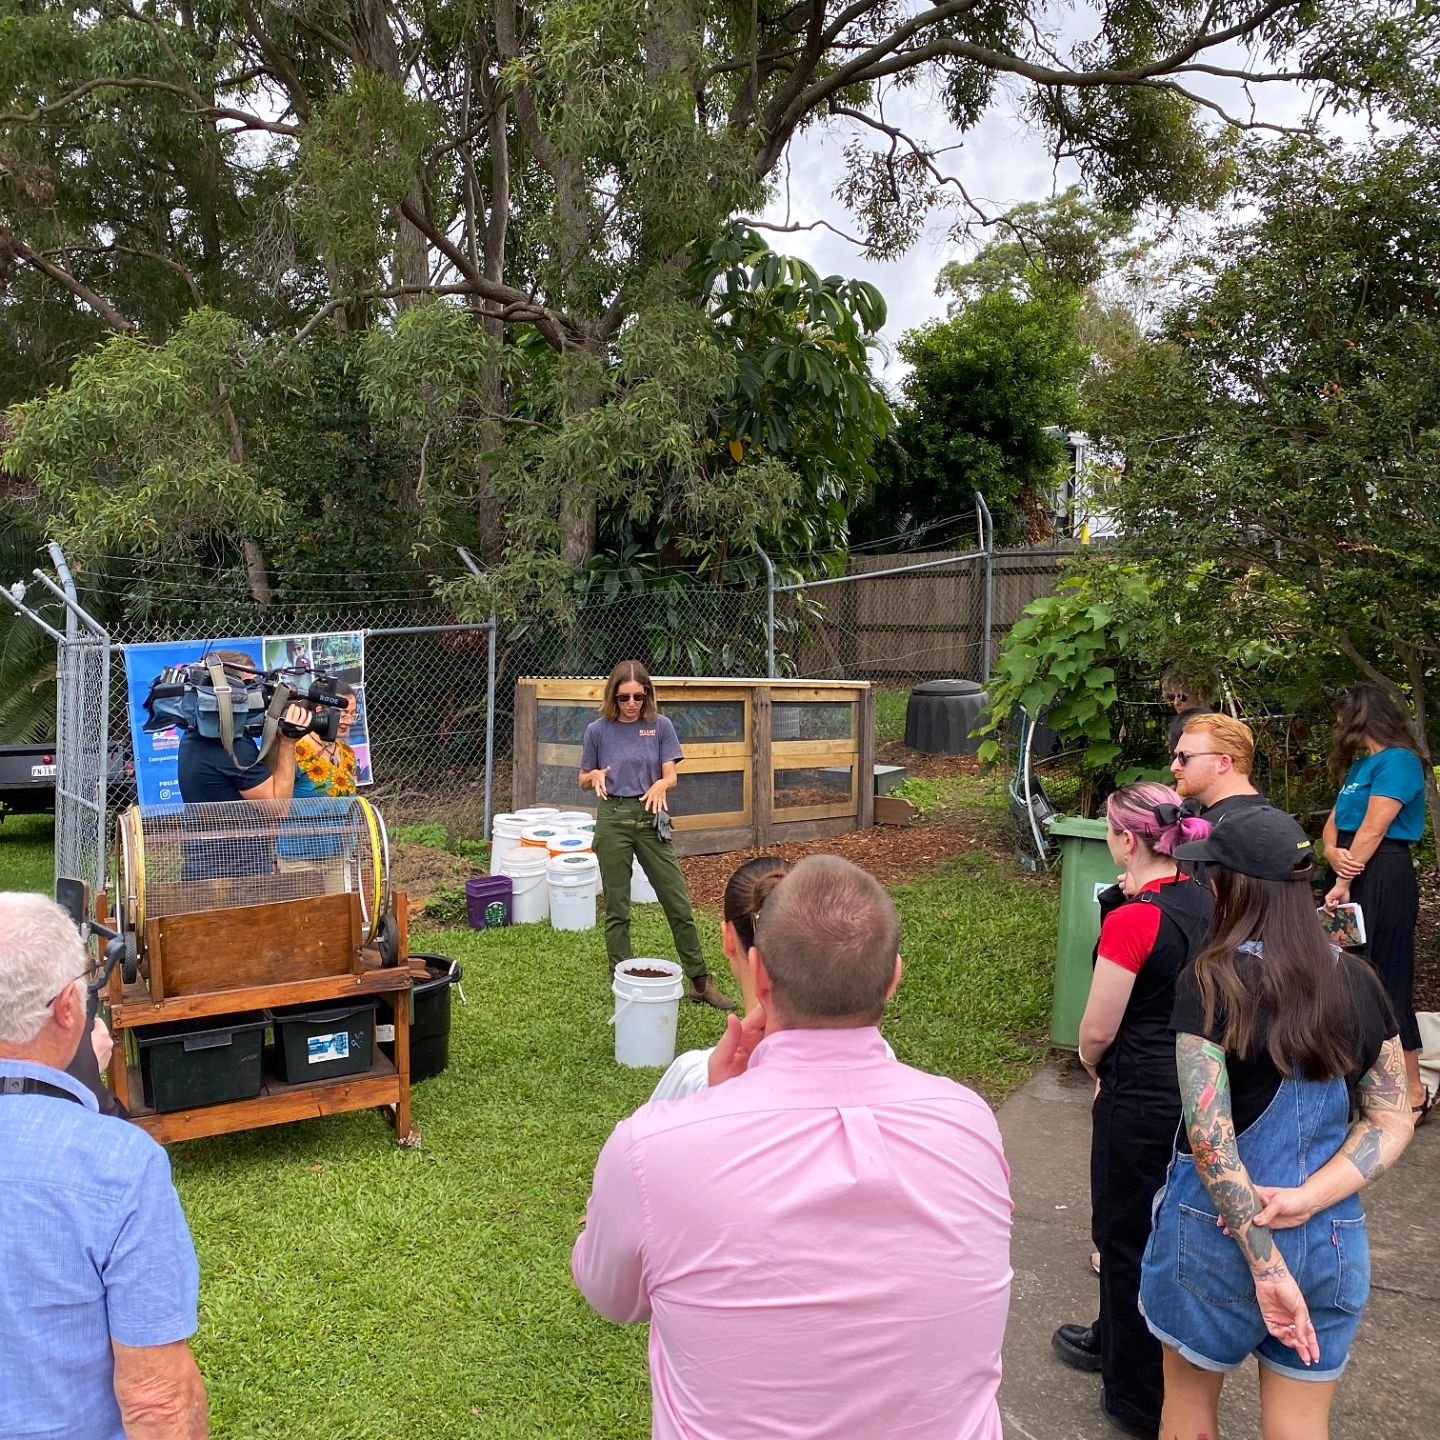 🎥 NEWS feature @7newsgc 

We were excited to feature on 7News last week talking about our community composting programs.

Head to our stories to check us out in action!